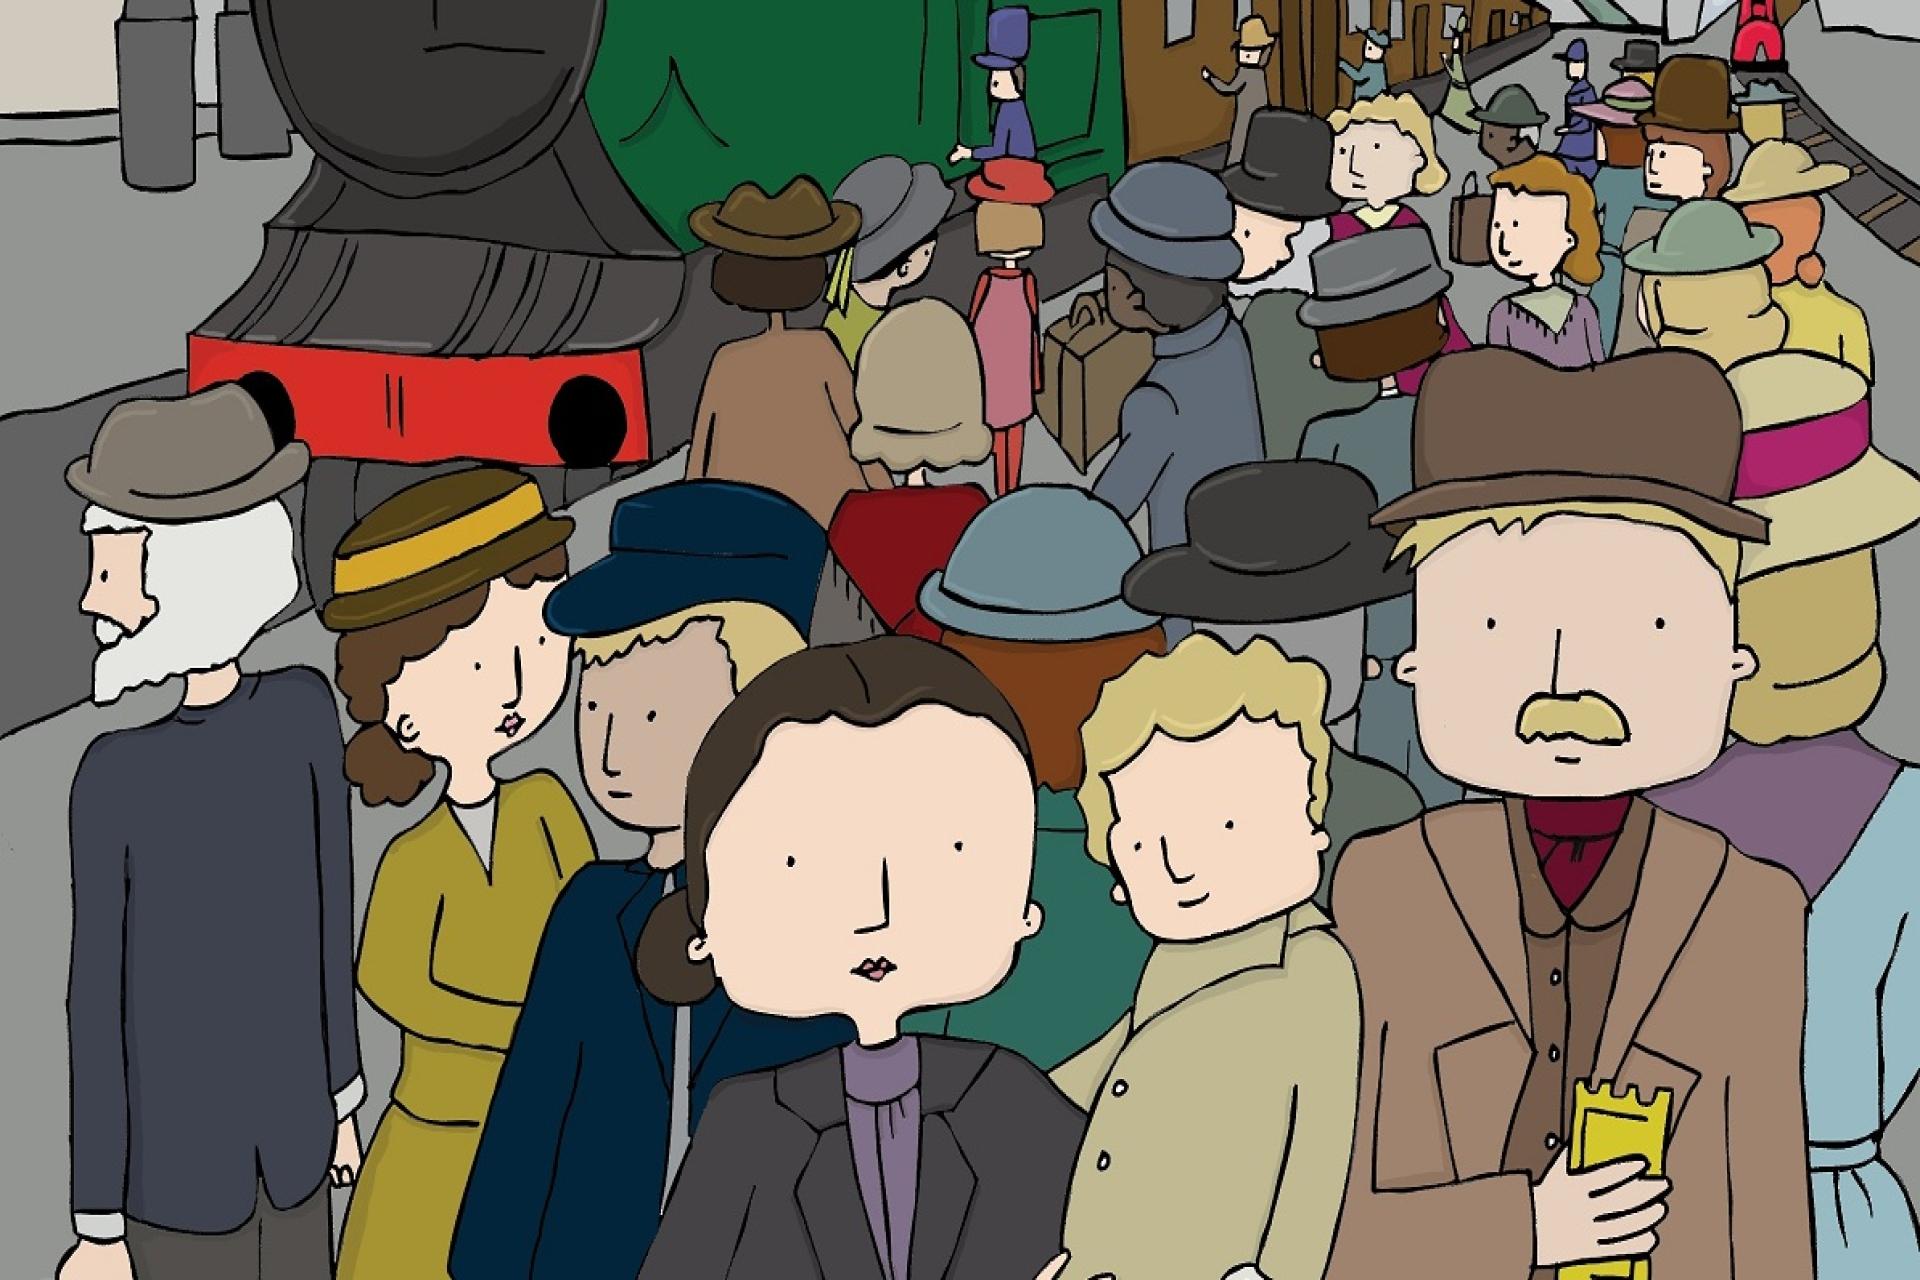 An illustration of people waiting for a train